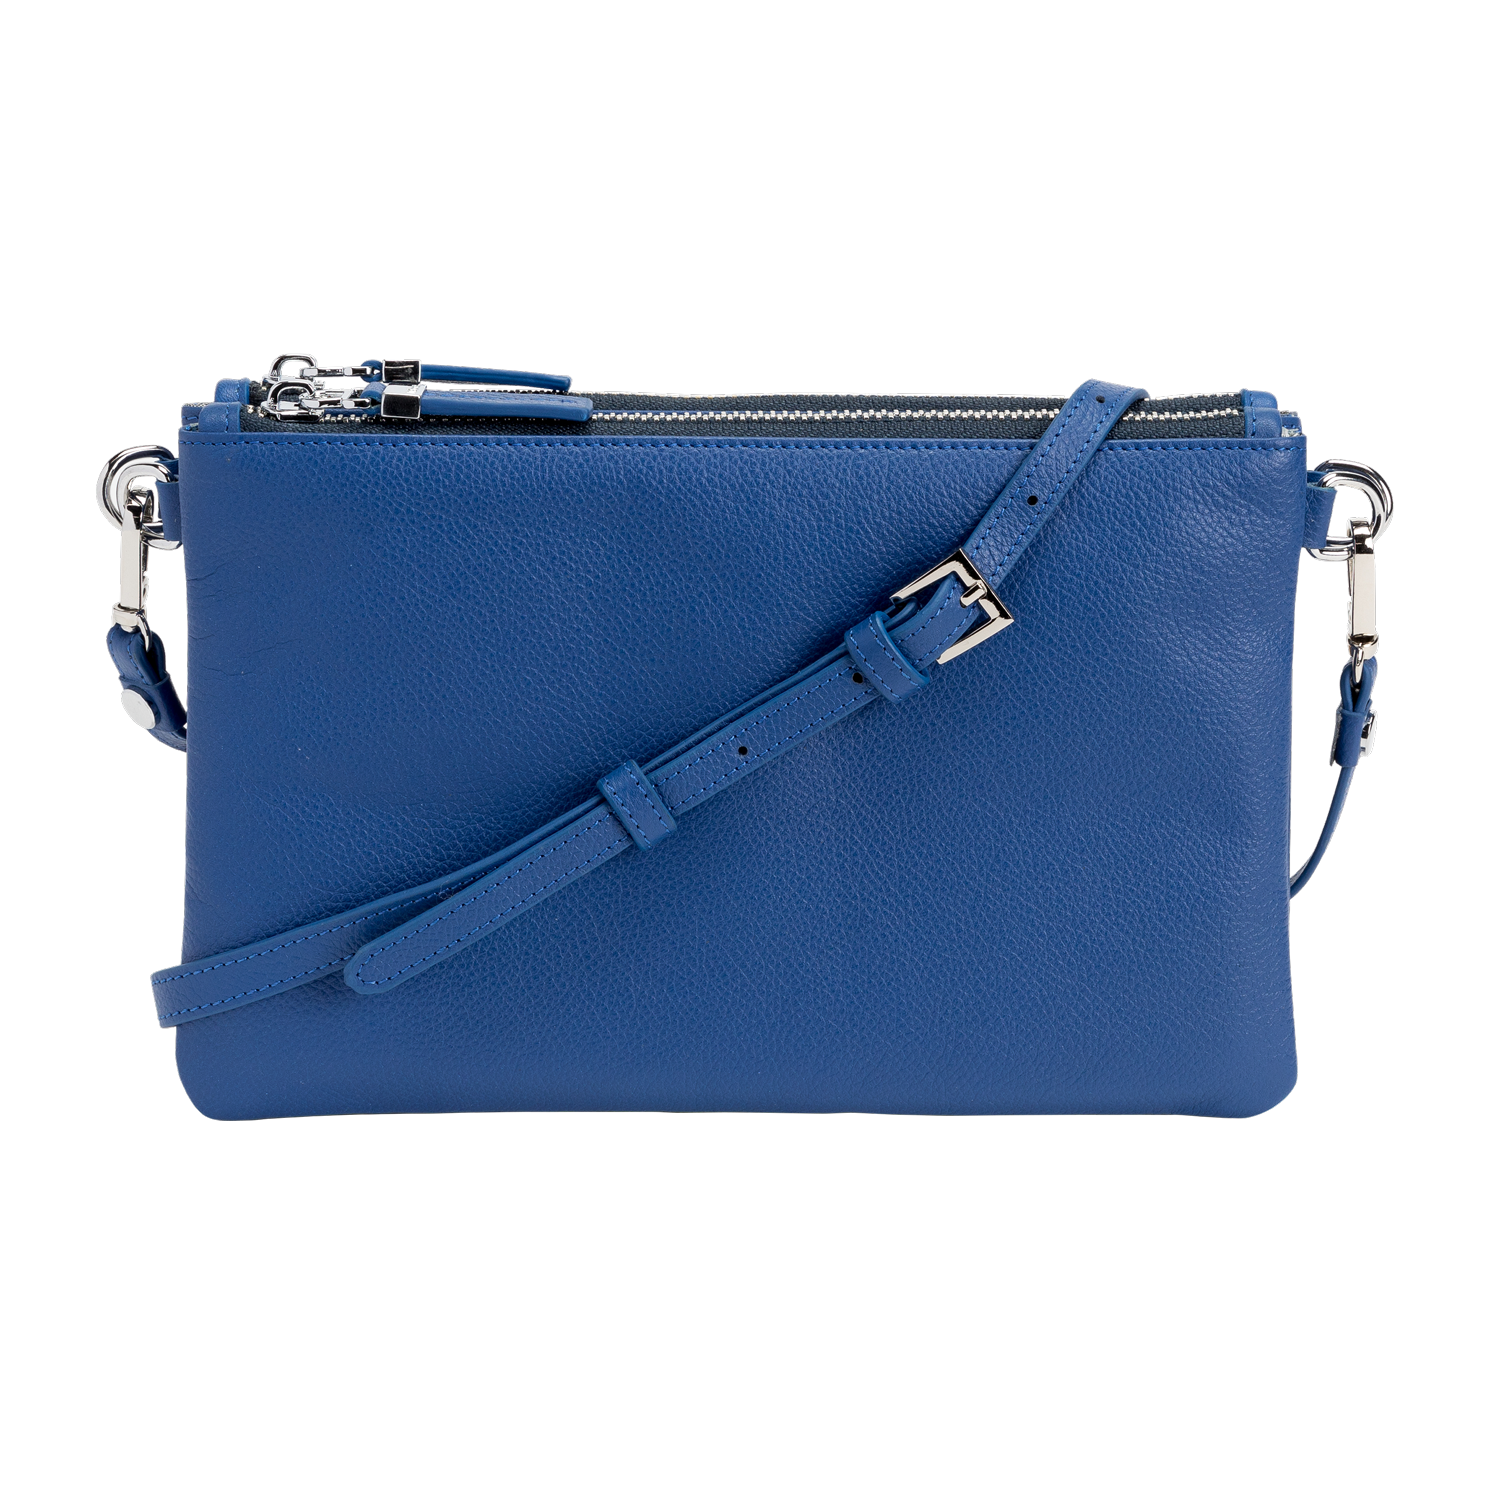 Gemela Shoulder Bag - Lustone | Stylish Leather Bags and Accessories